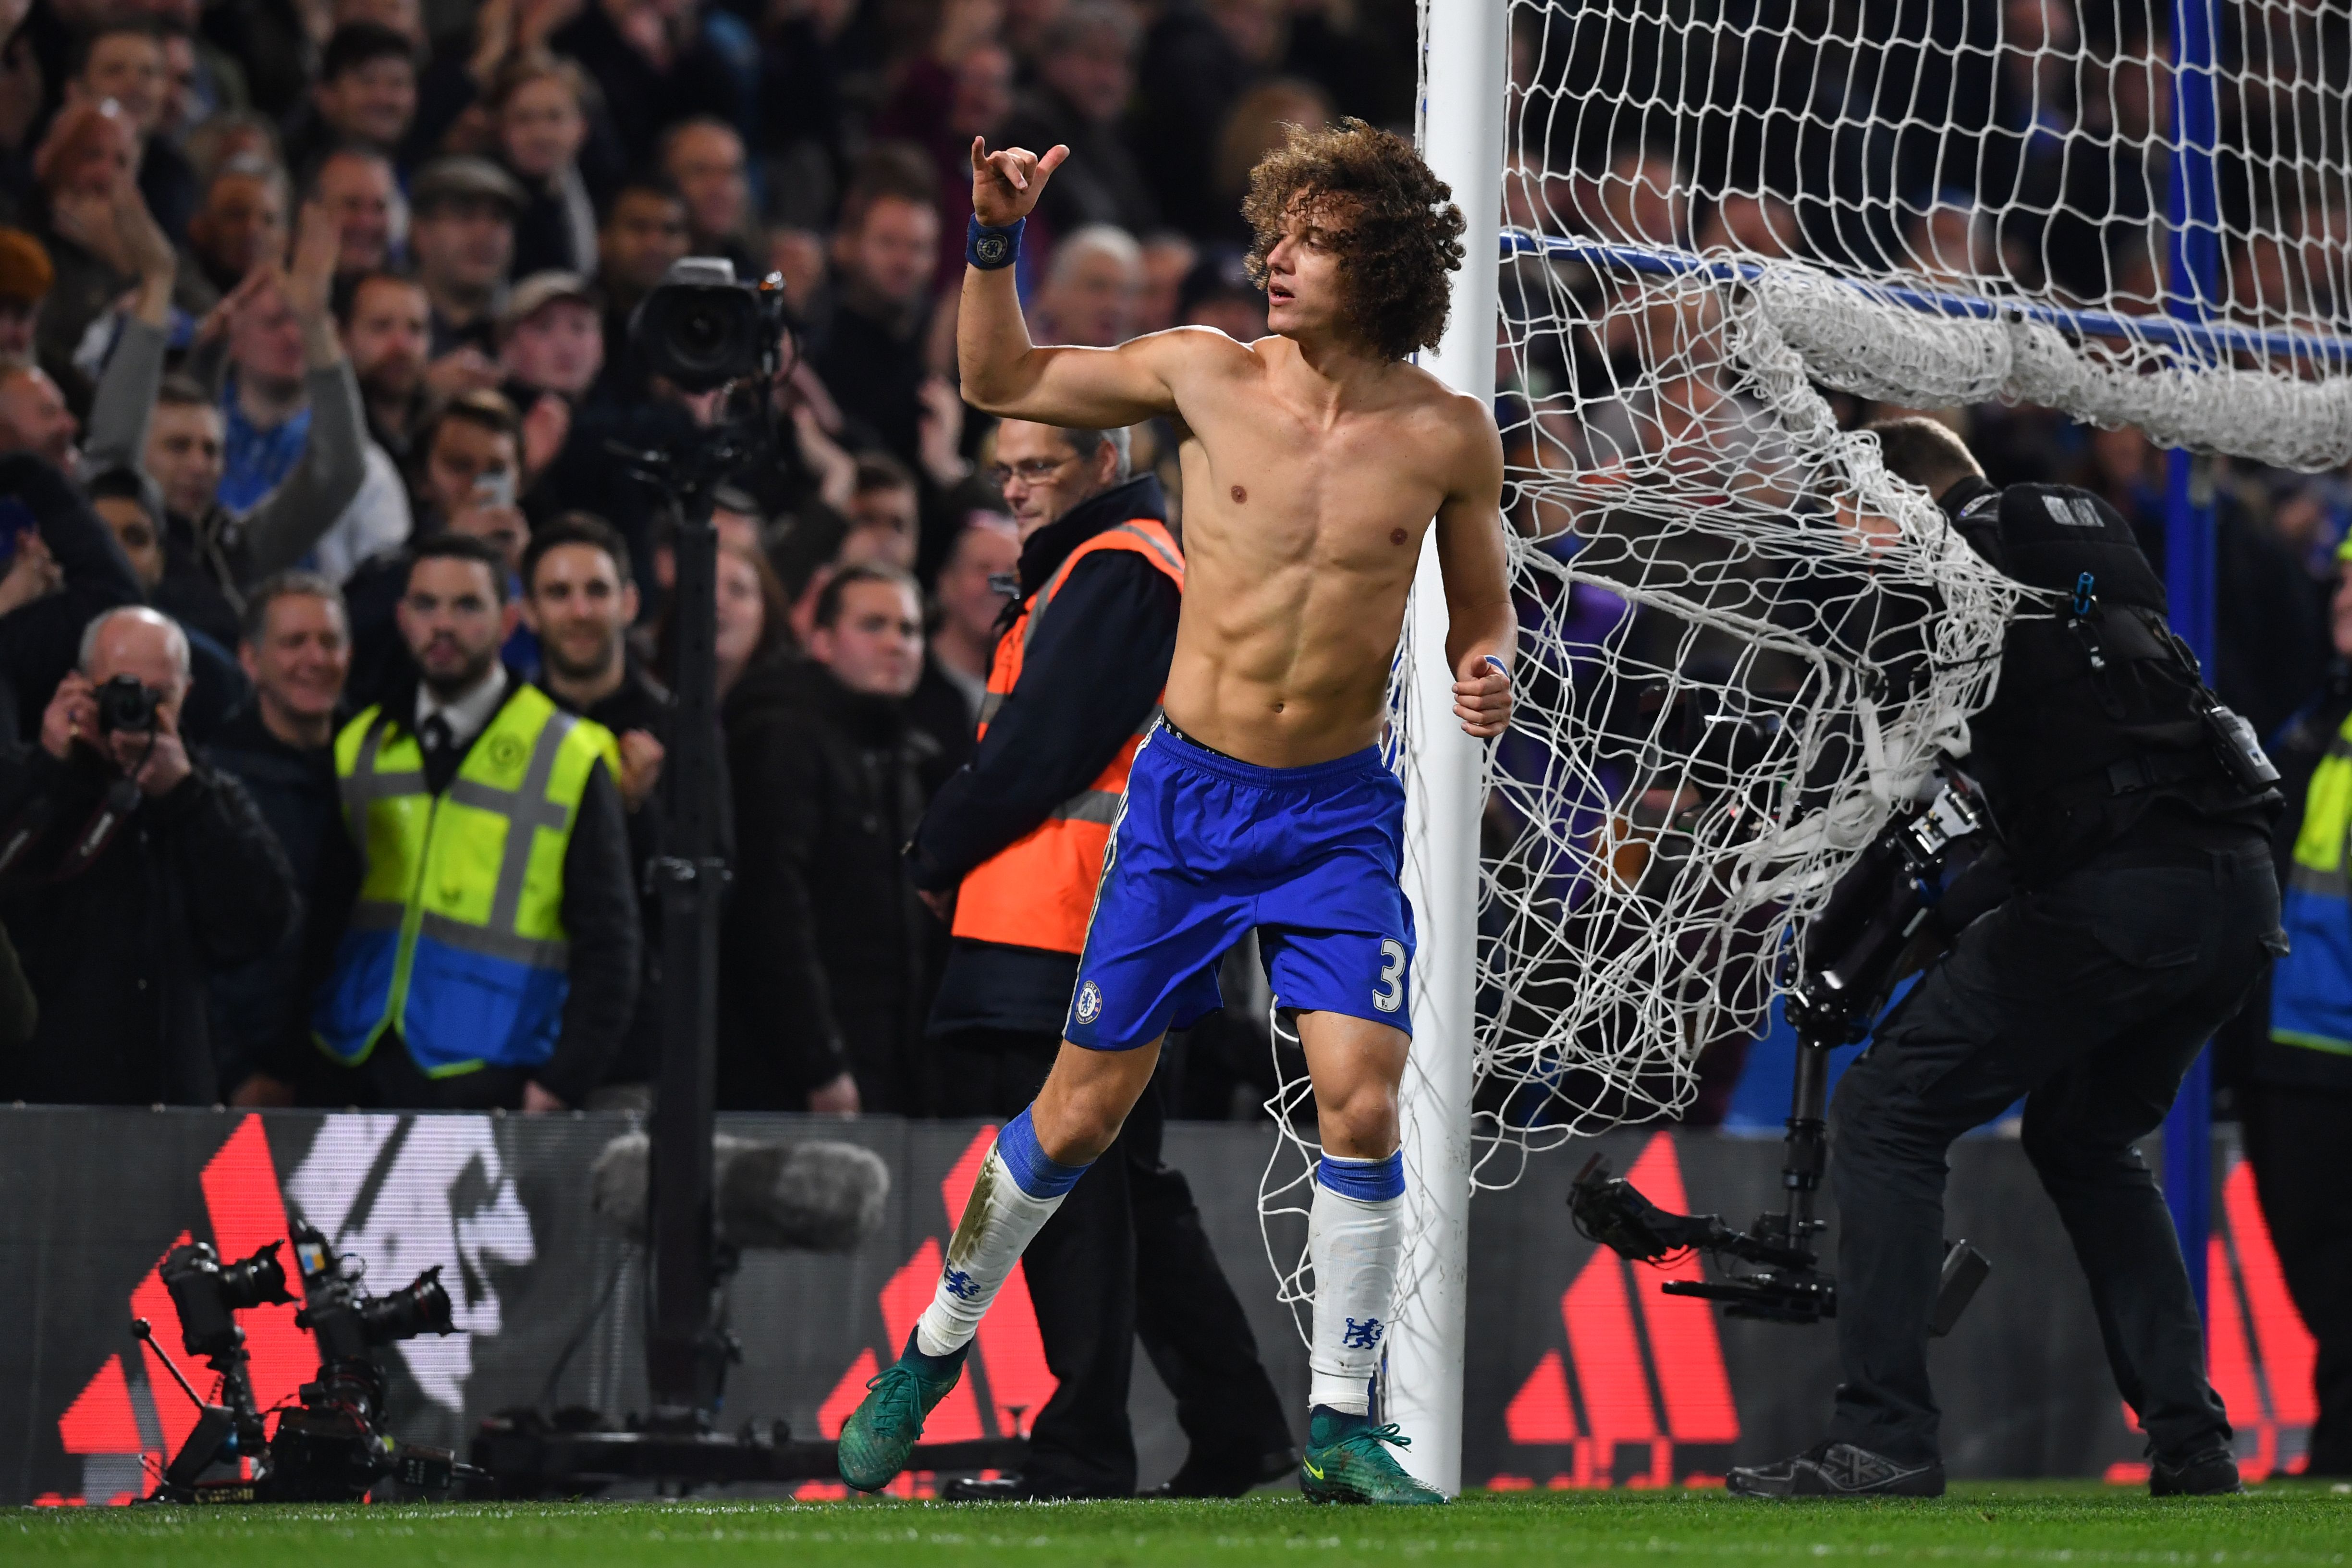 Chelsea's Brazilian defender David Luiz celebrates at the end of the English Premier League football match between Chelsea and Tottenham Hotspur at Stamford Bridge in London on November 26, 2016. / AFP / Ben STANSALL / RESTRICTED TO EDITORIAL USE. No use with unauthorized audio, video, data, fixture lists, club/league logos or 'live' services. Online in-match use limited to 75 images, no video emulation. No use in betting, games or single club/league/player publications. / (Photo credit should read BEN STANSALL/AFP/Getty Images)